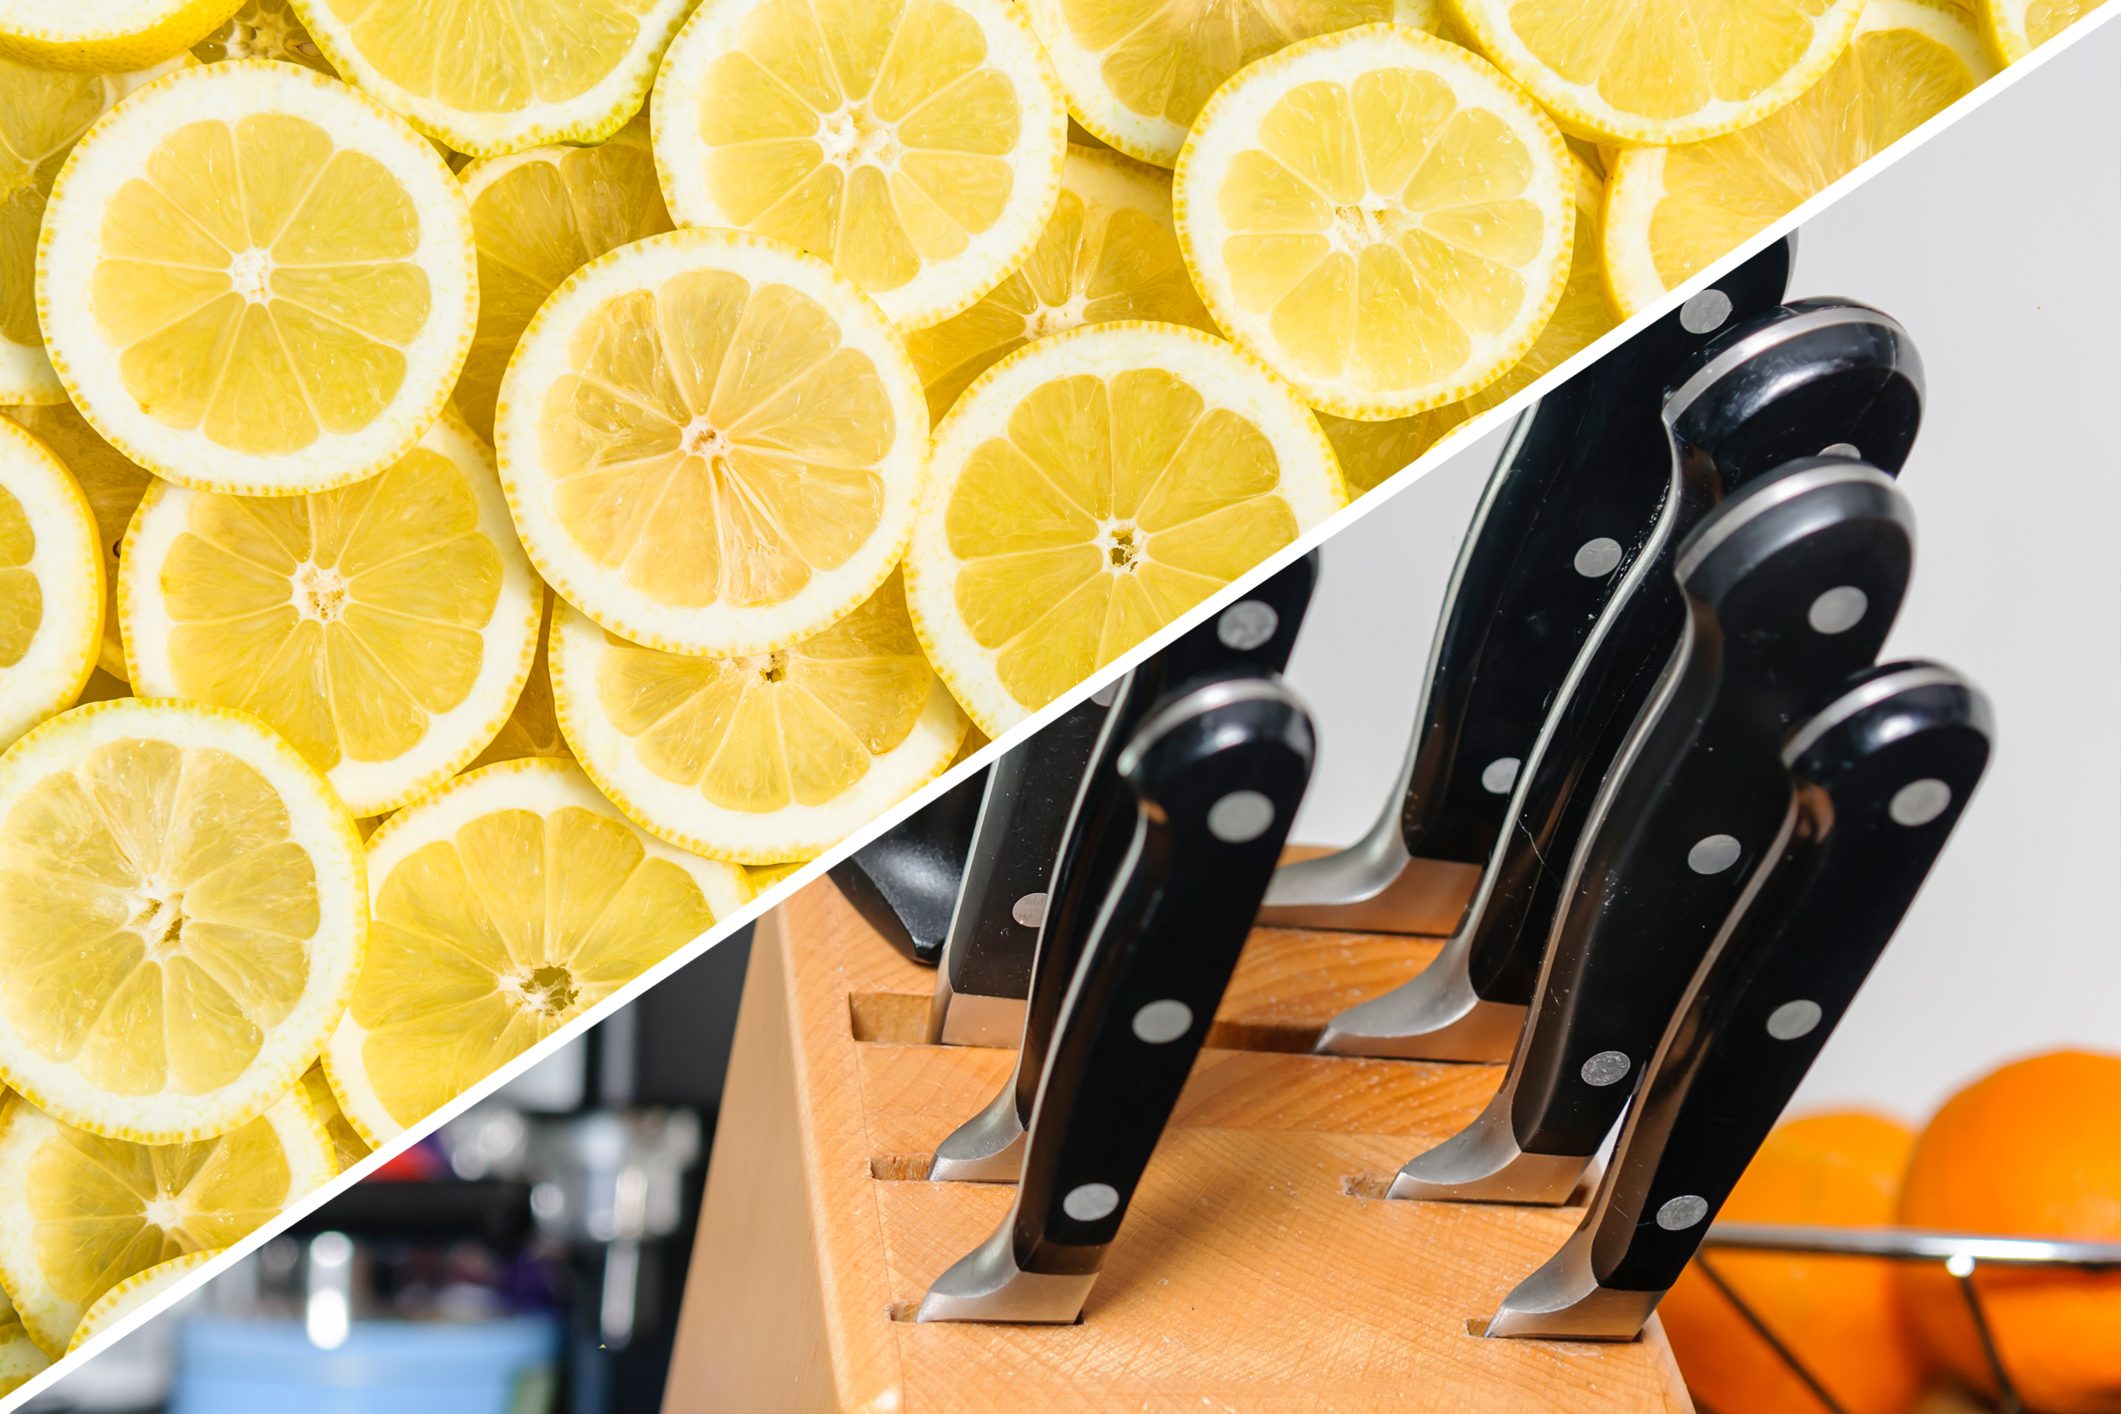 knives lemon cleaning uses